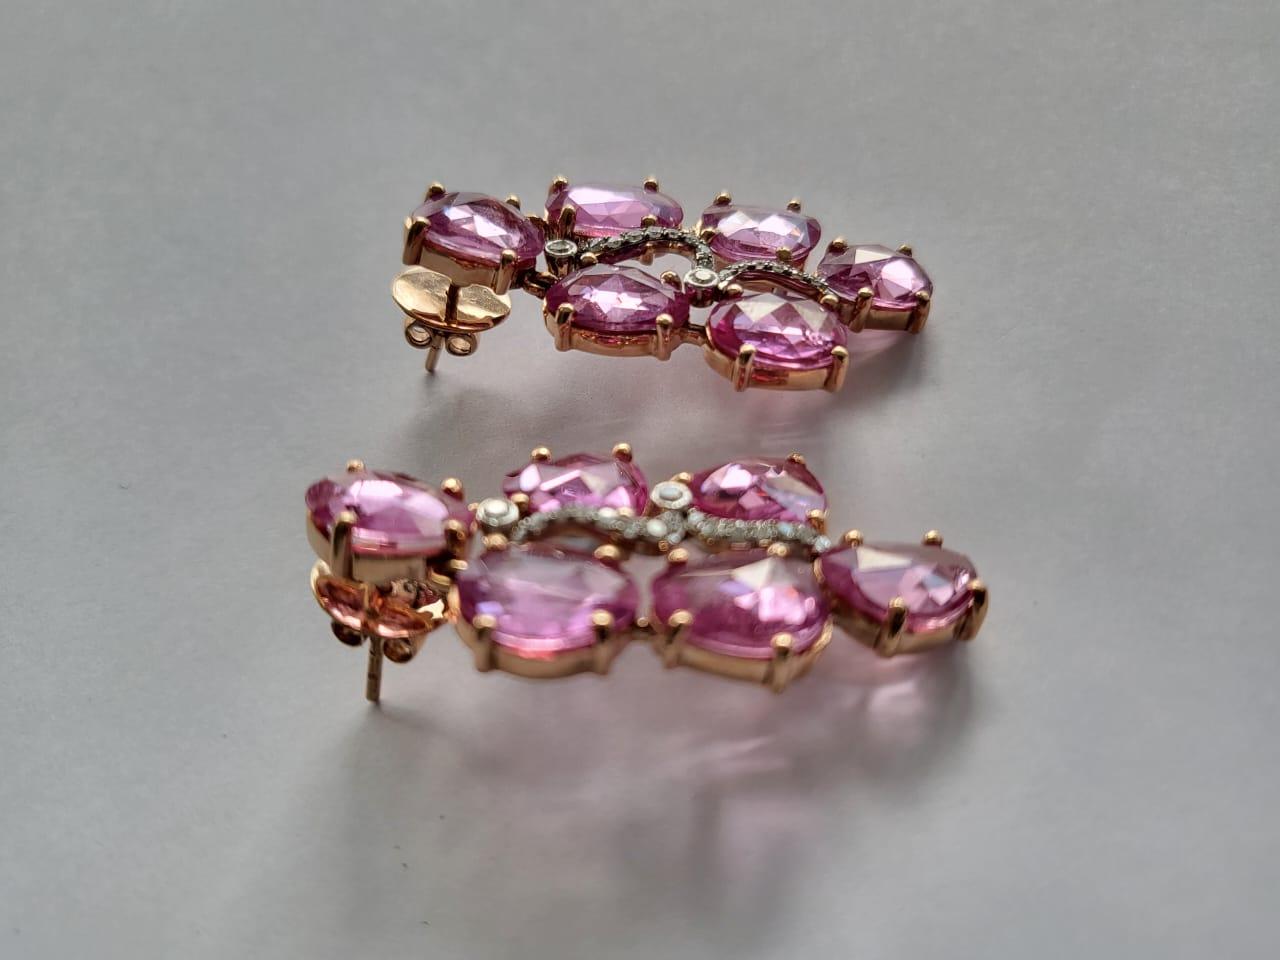 A very gorgeous and modern, Pink Sapphire Stud Earrings set in 18K Rose Gold & Diamonds. The weight of the Pink Sapphires Rose Cuts is 18.25 carats. The Pink Sapphires are of Ceylon (Sri Lanka) origin. The weight of the Diamonds is 0.34 carats. Net